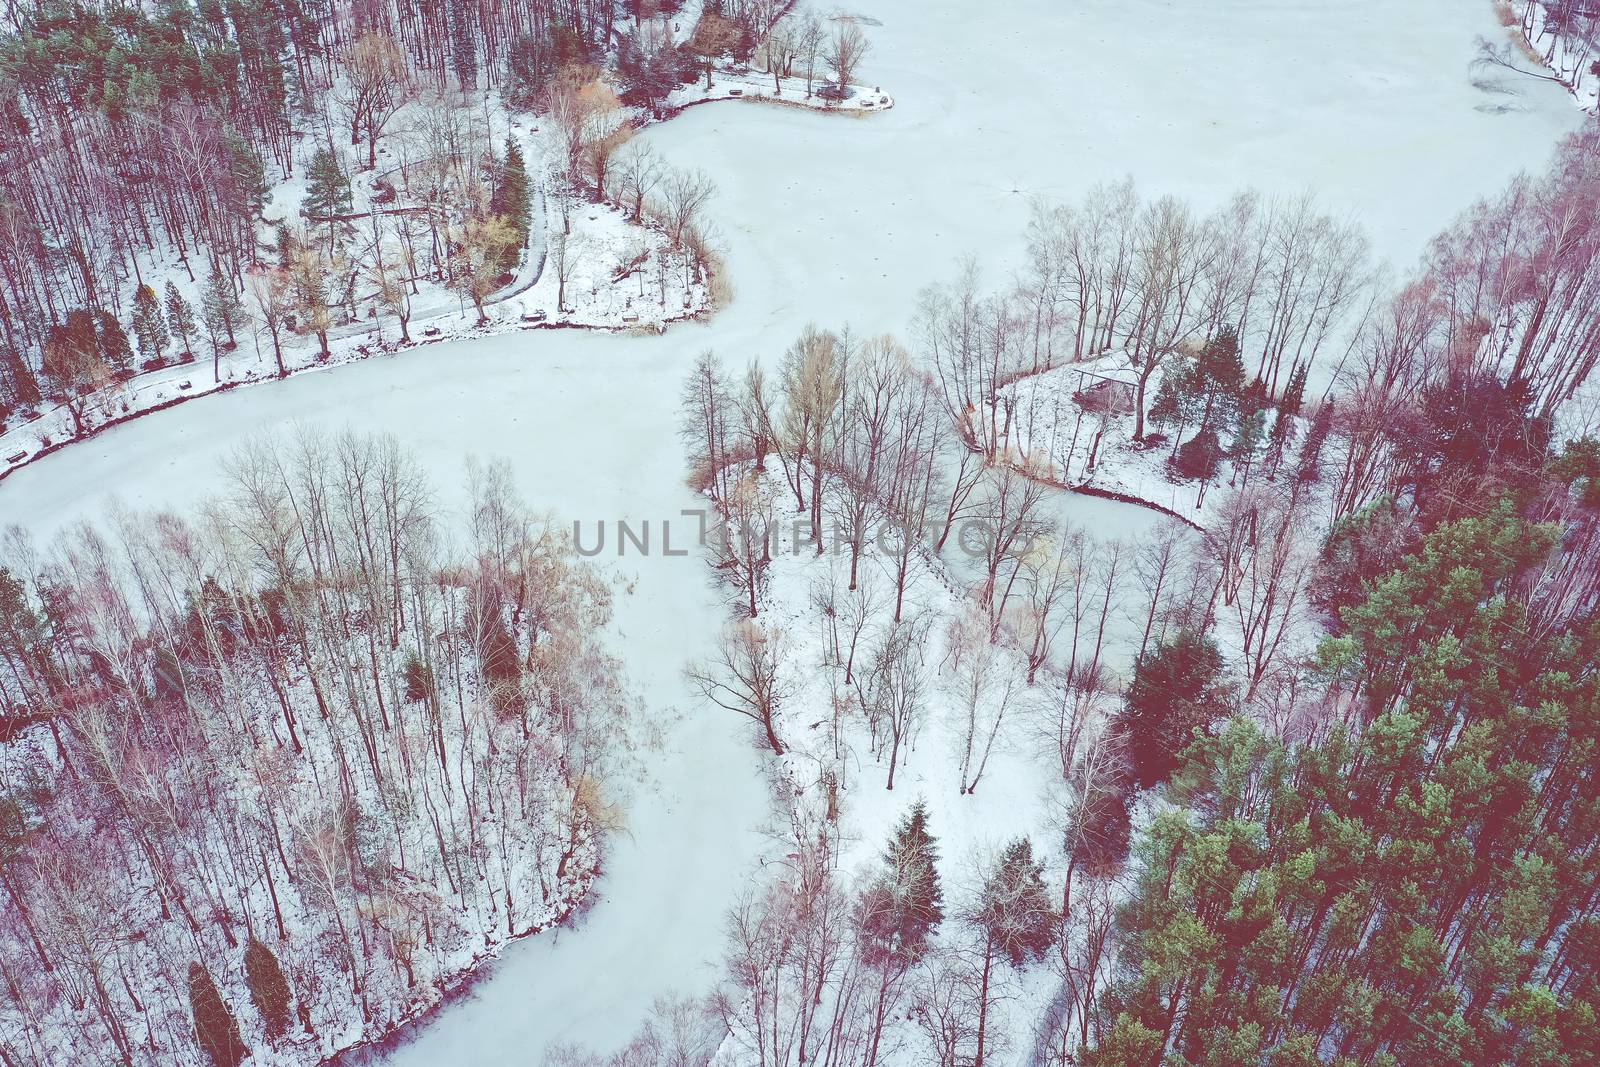 Aerial view of frozen lake. Winter scenery. Landscape photo captured with drone above winter wonderland.